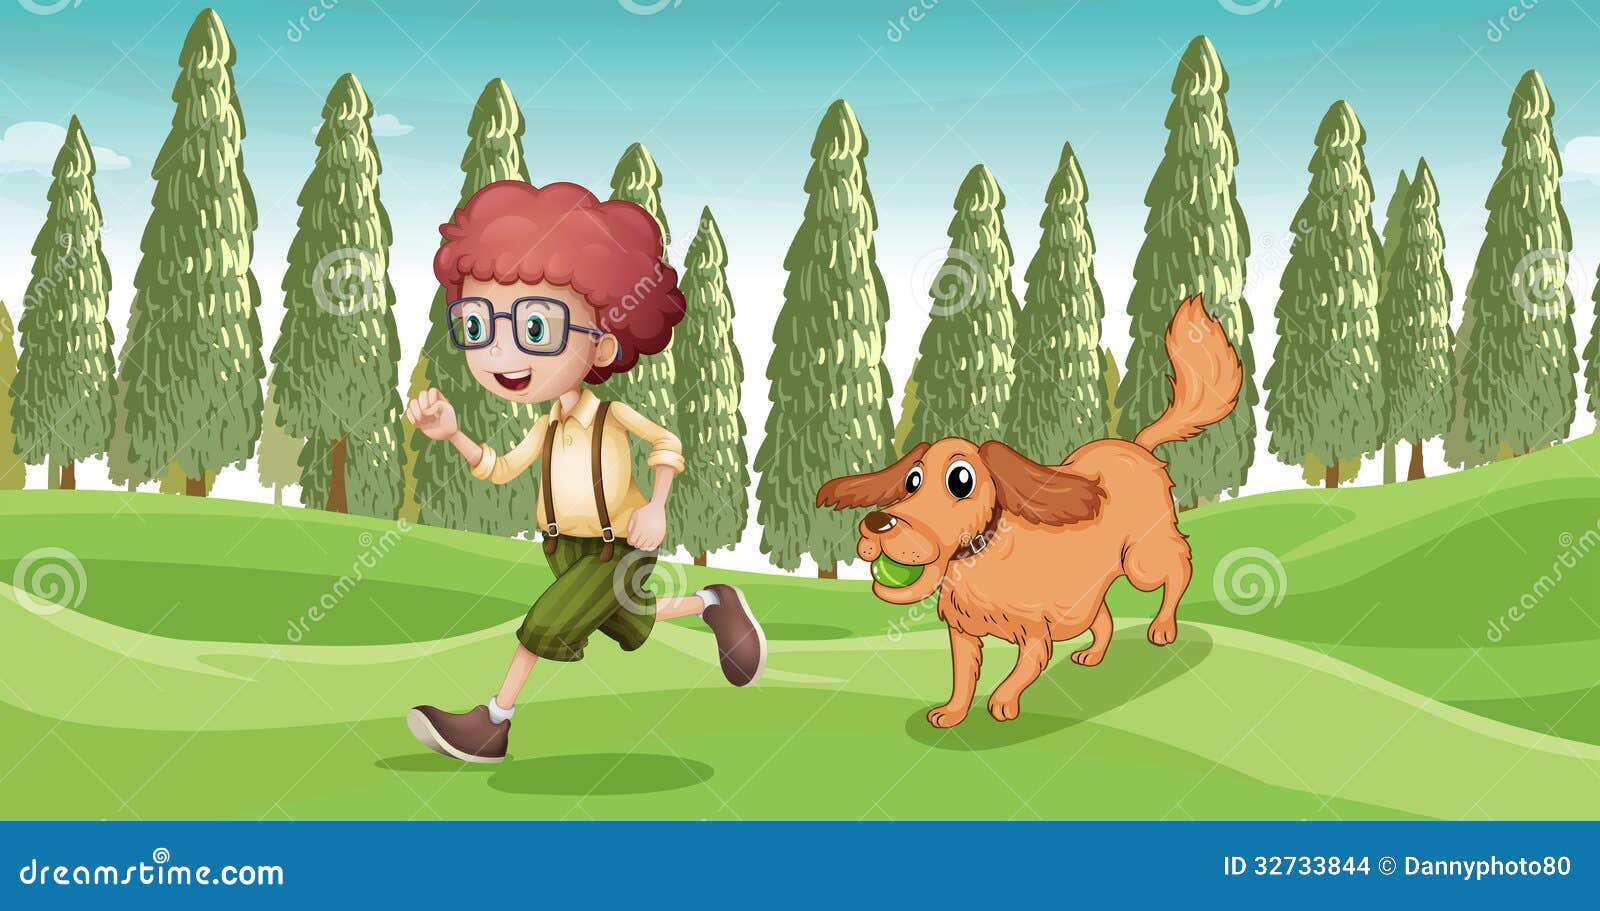 A Boy And His Dog Playing At The Park Stock Images Image 32733844